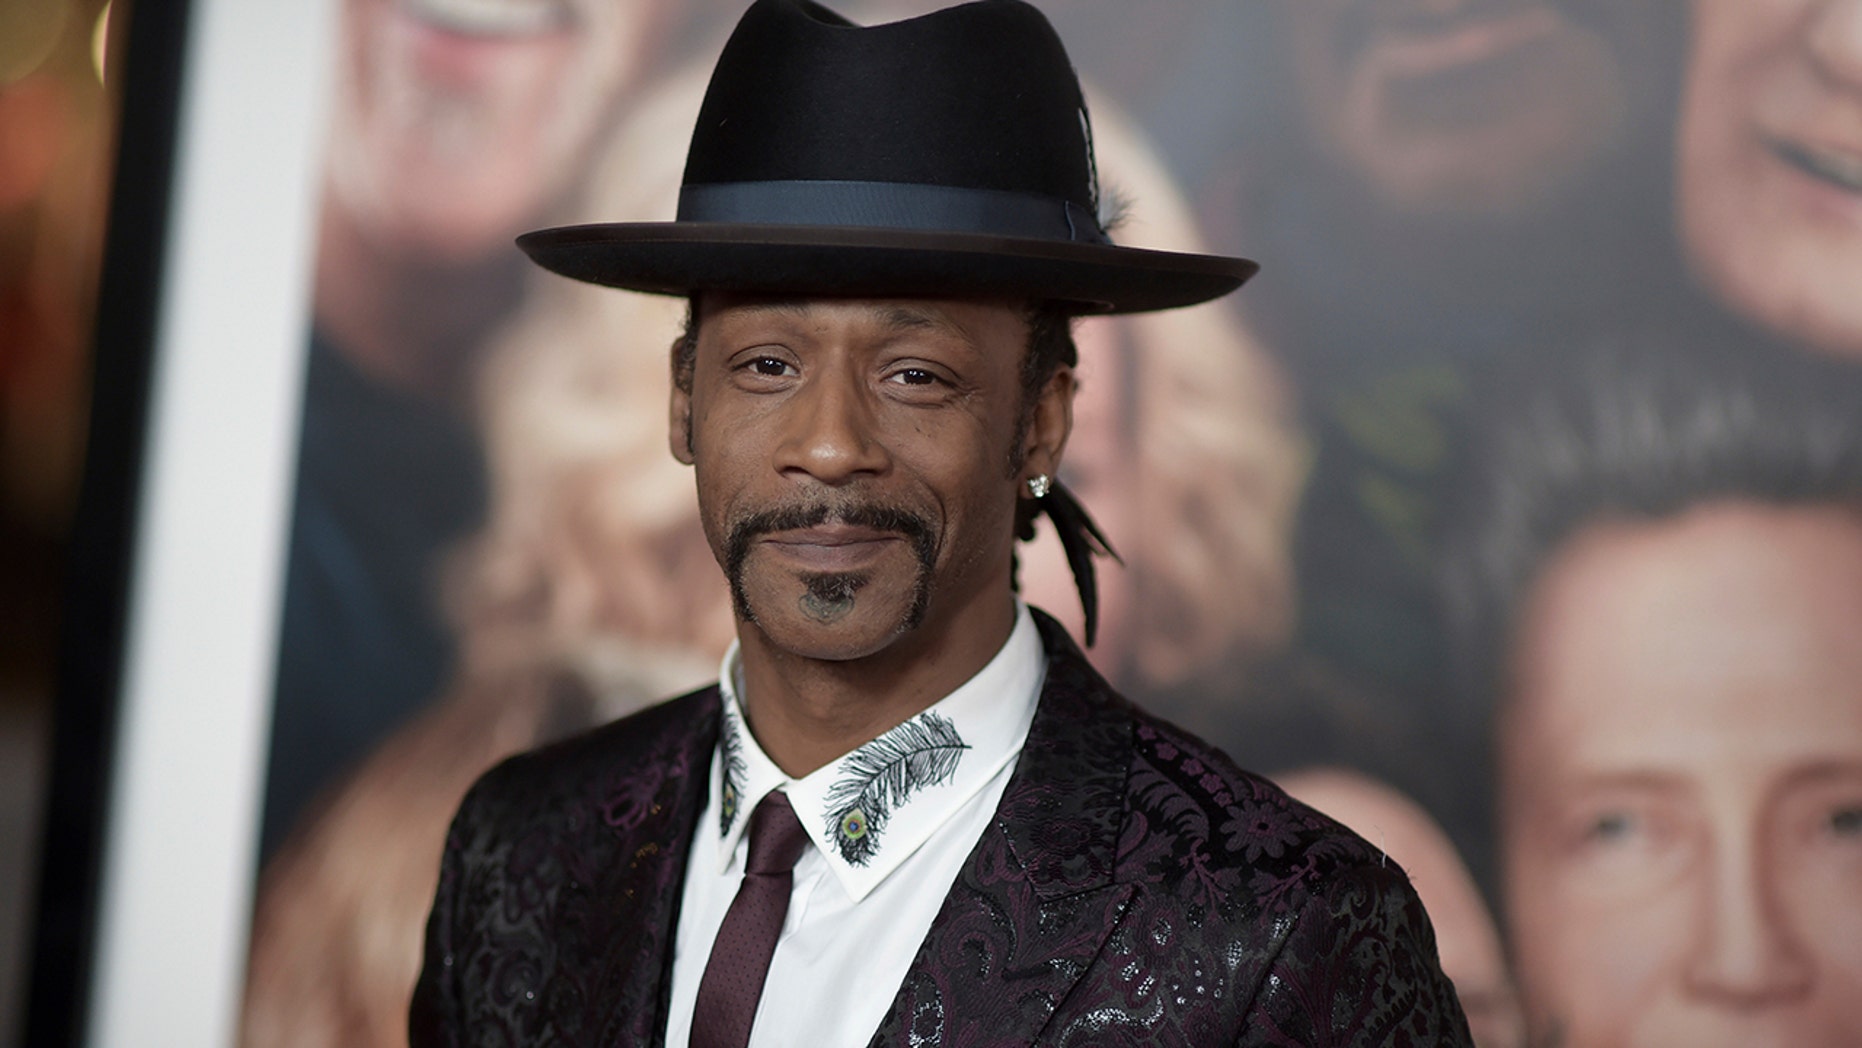 DOSSIER - In this photo of December 13, 2017, Katt Williams attends the premiere in Los Angeles of 